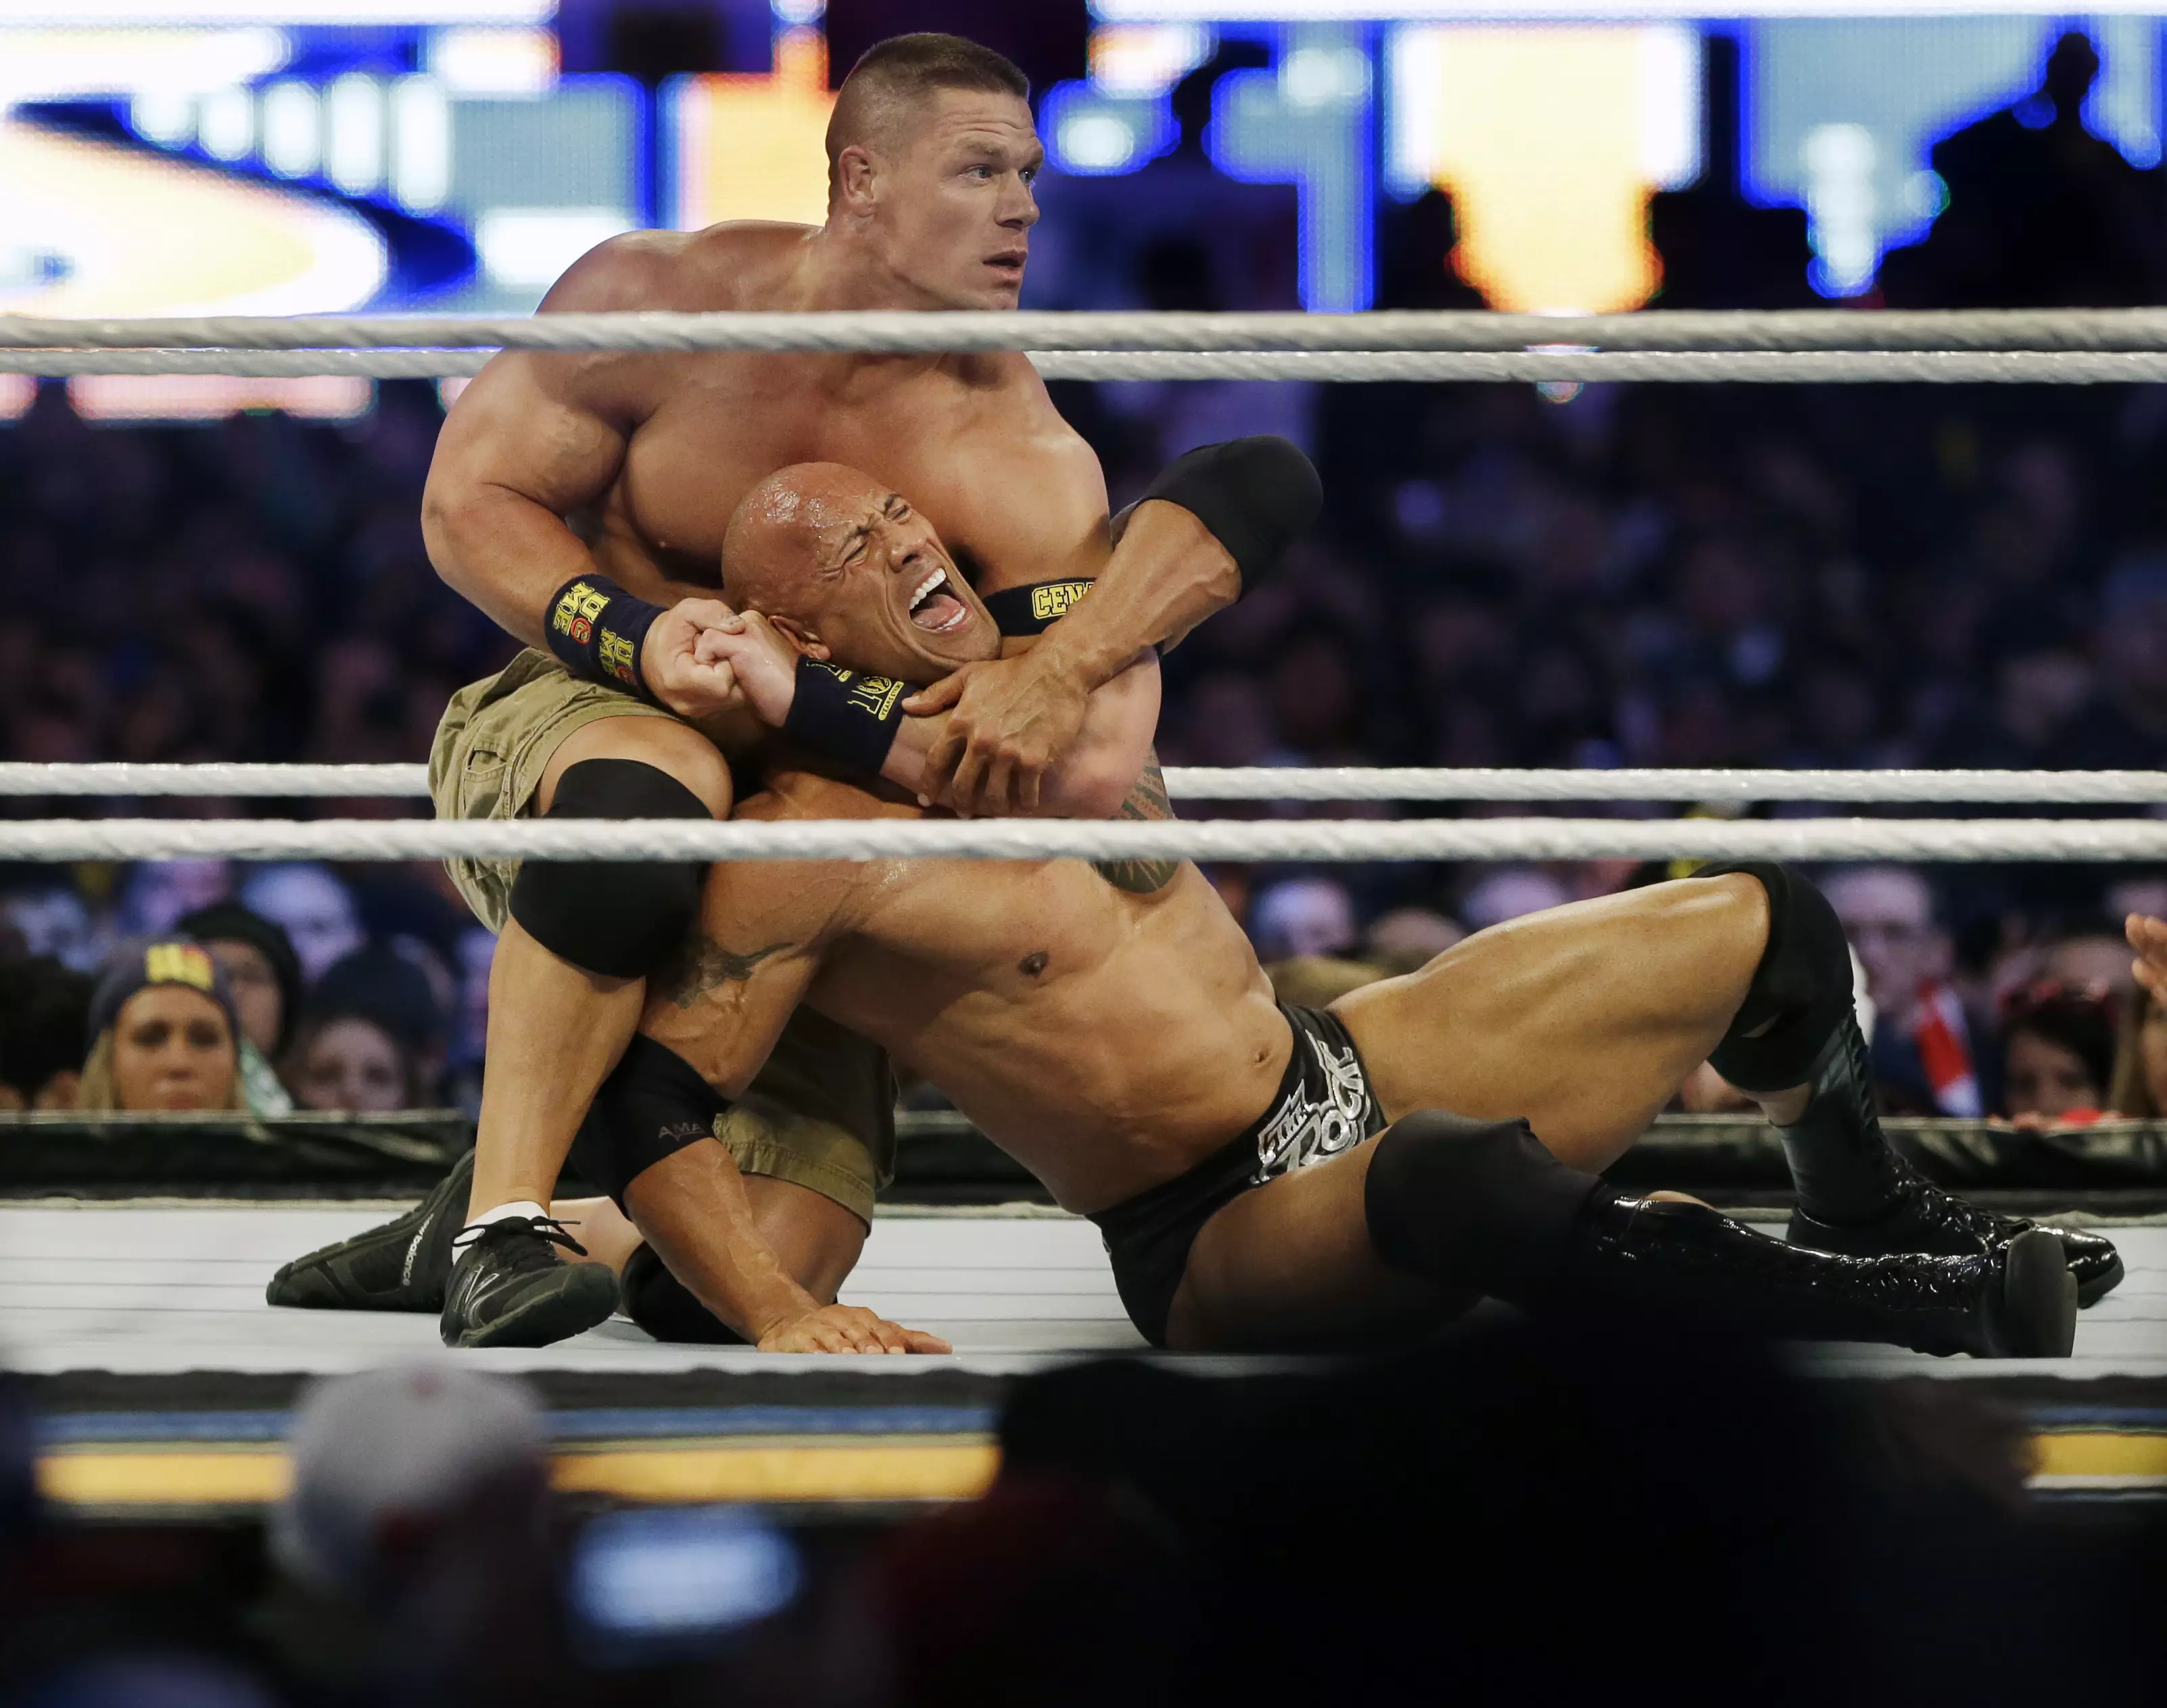 John Cena Reveals What He Told The Rock After Their Wrestlemania 29 Fight